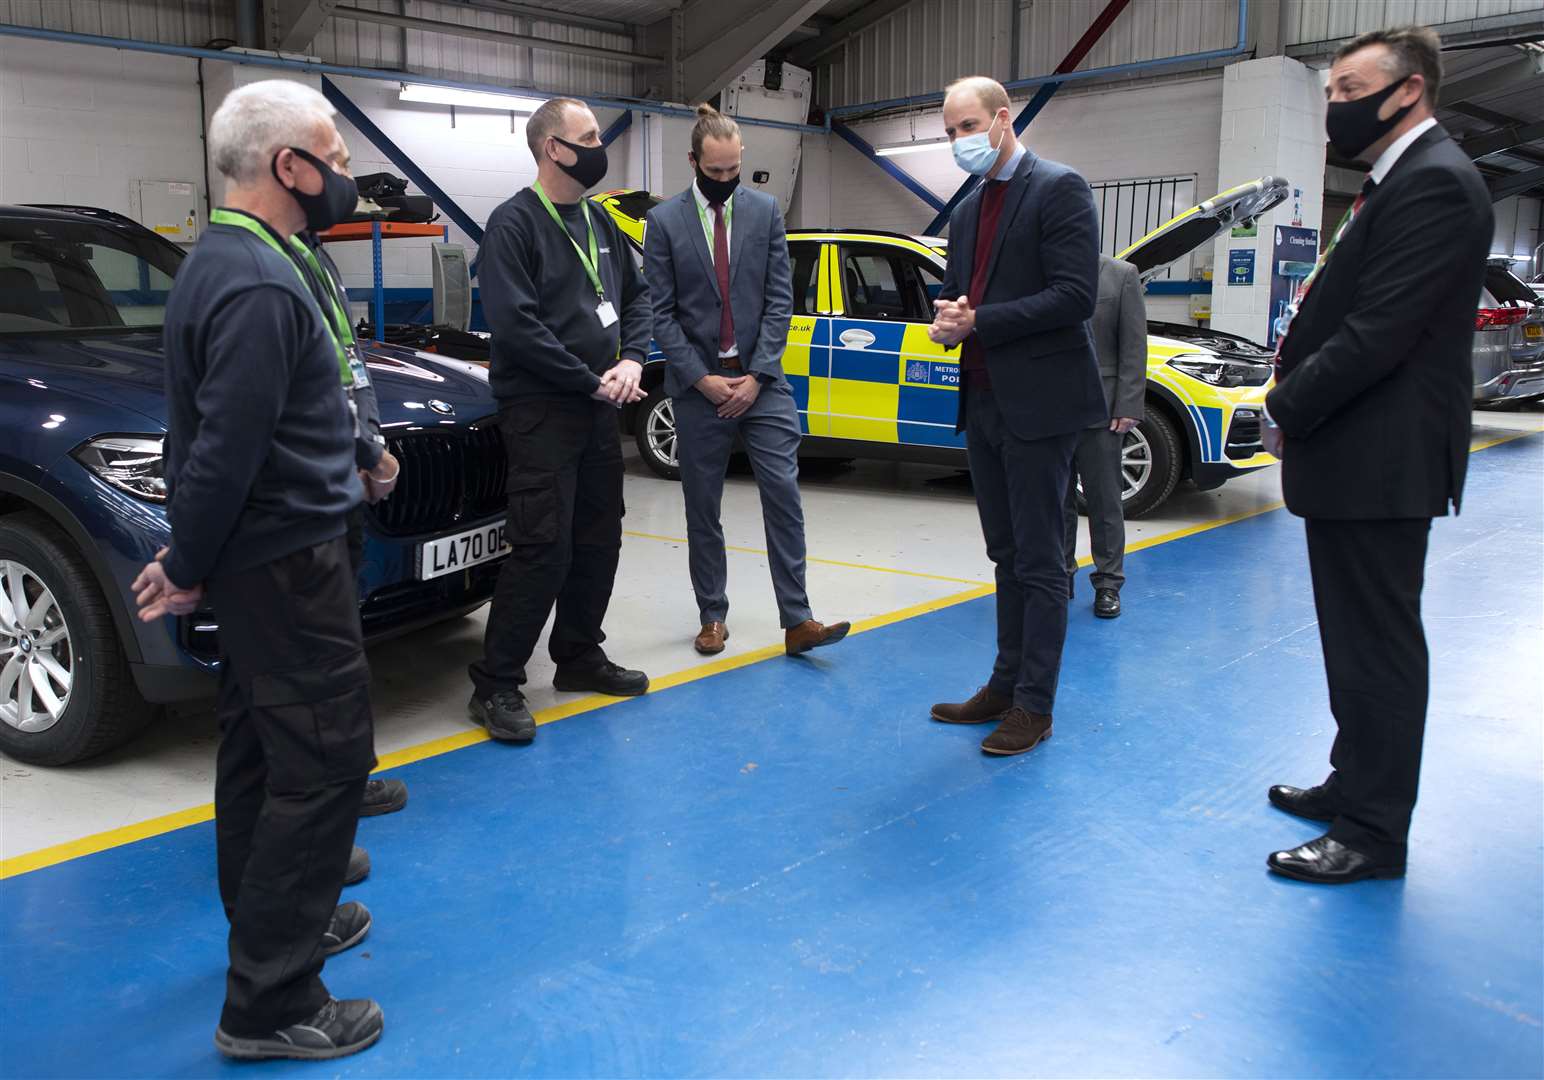 The duke joked ‘We’re always breaking your vehicles’, when told the company works on cars for Scotland Yard’s royalty protection department (David Rose/The Daily Telegraph)